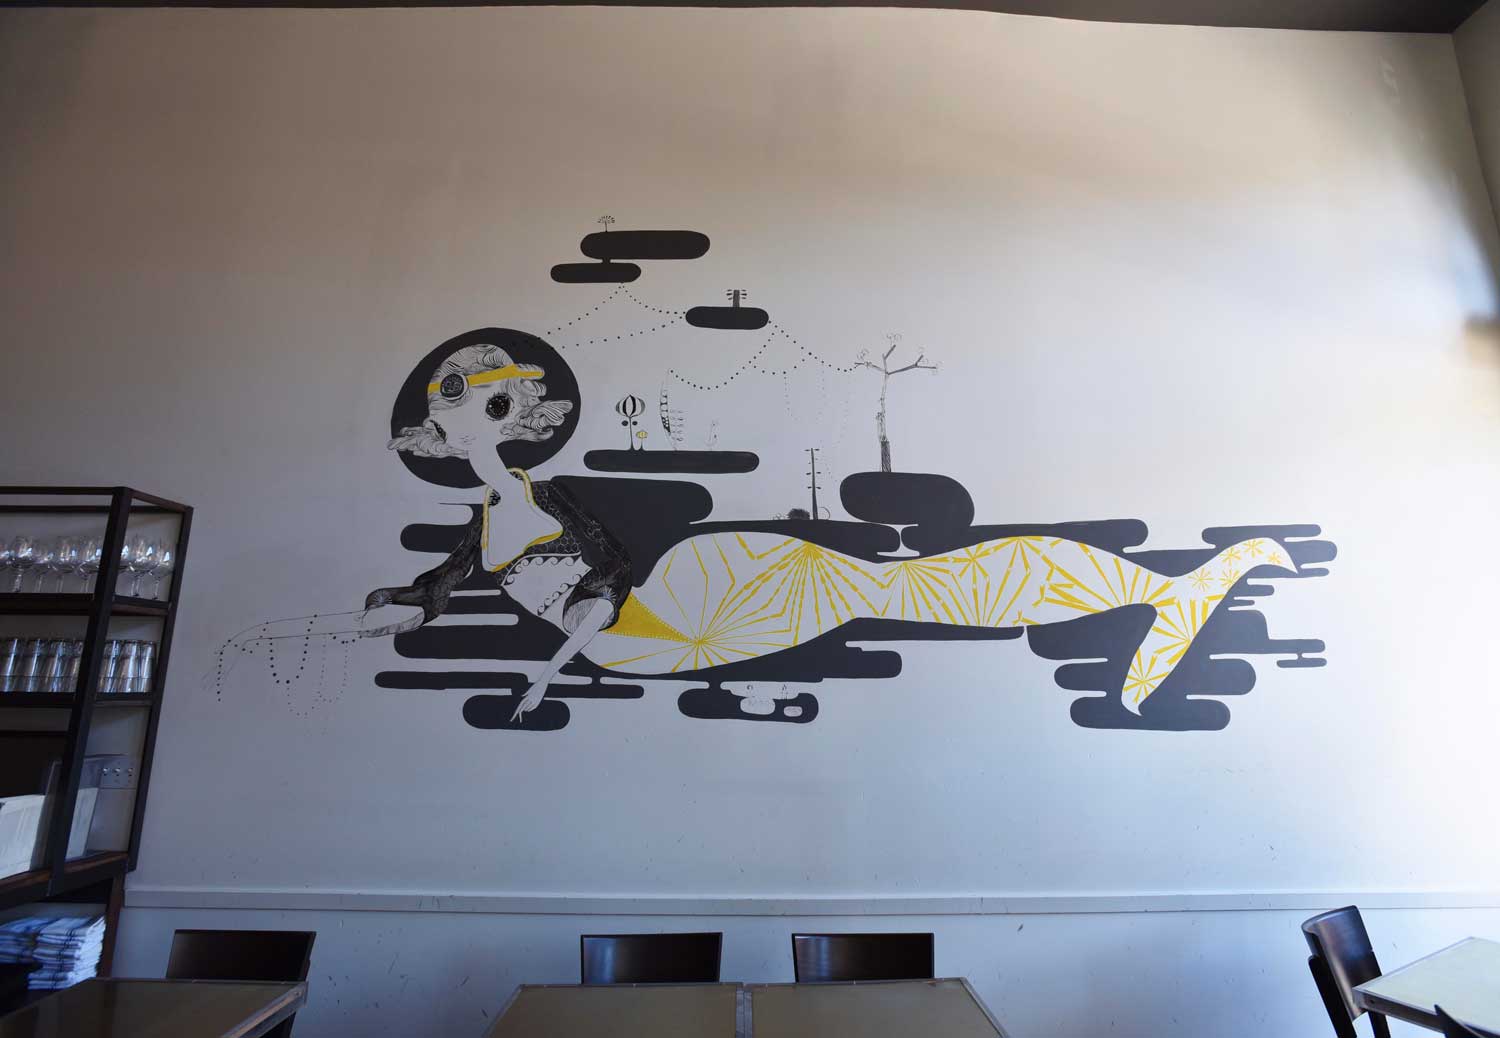 Quirky murals on the wall decorate Bar Crudo's interior.